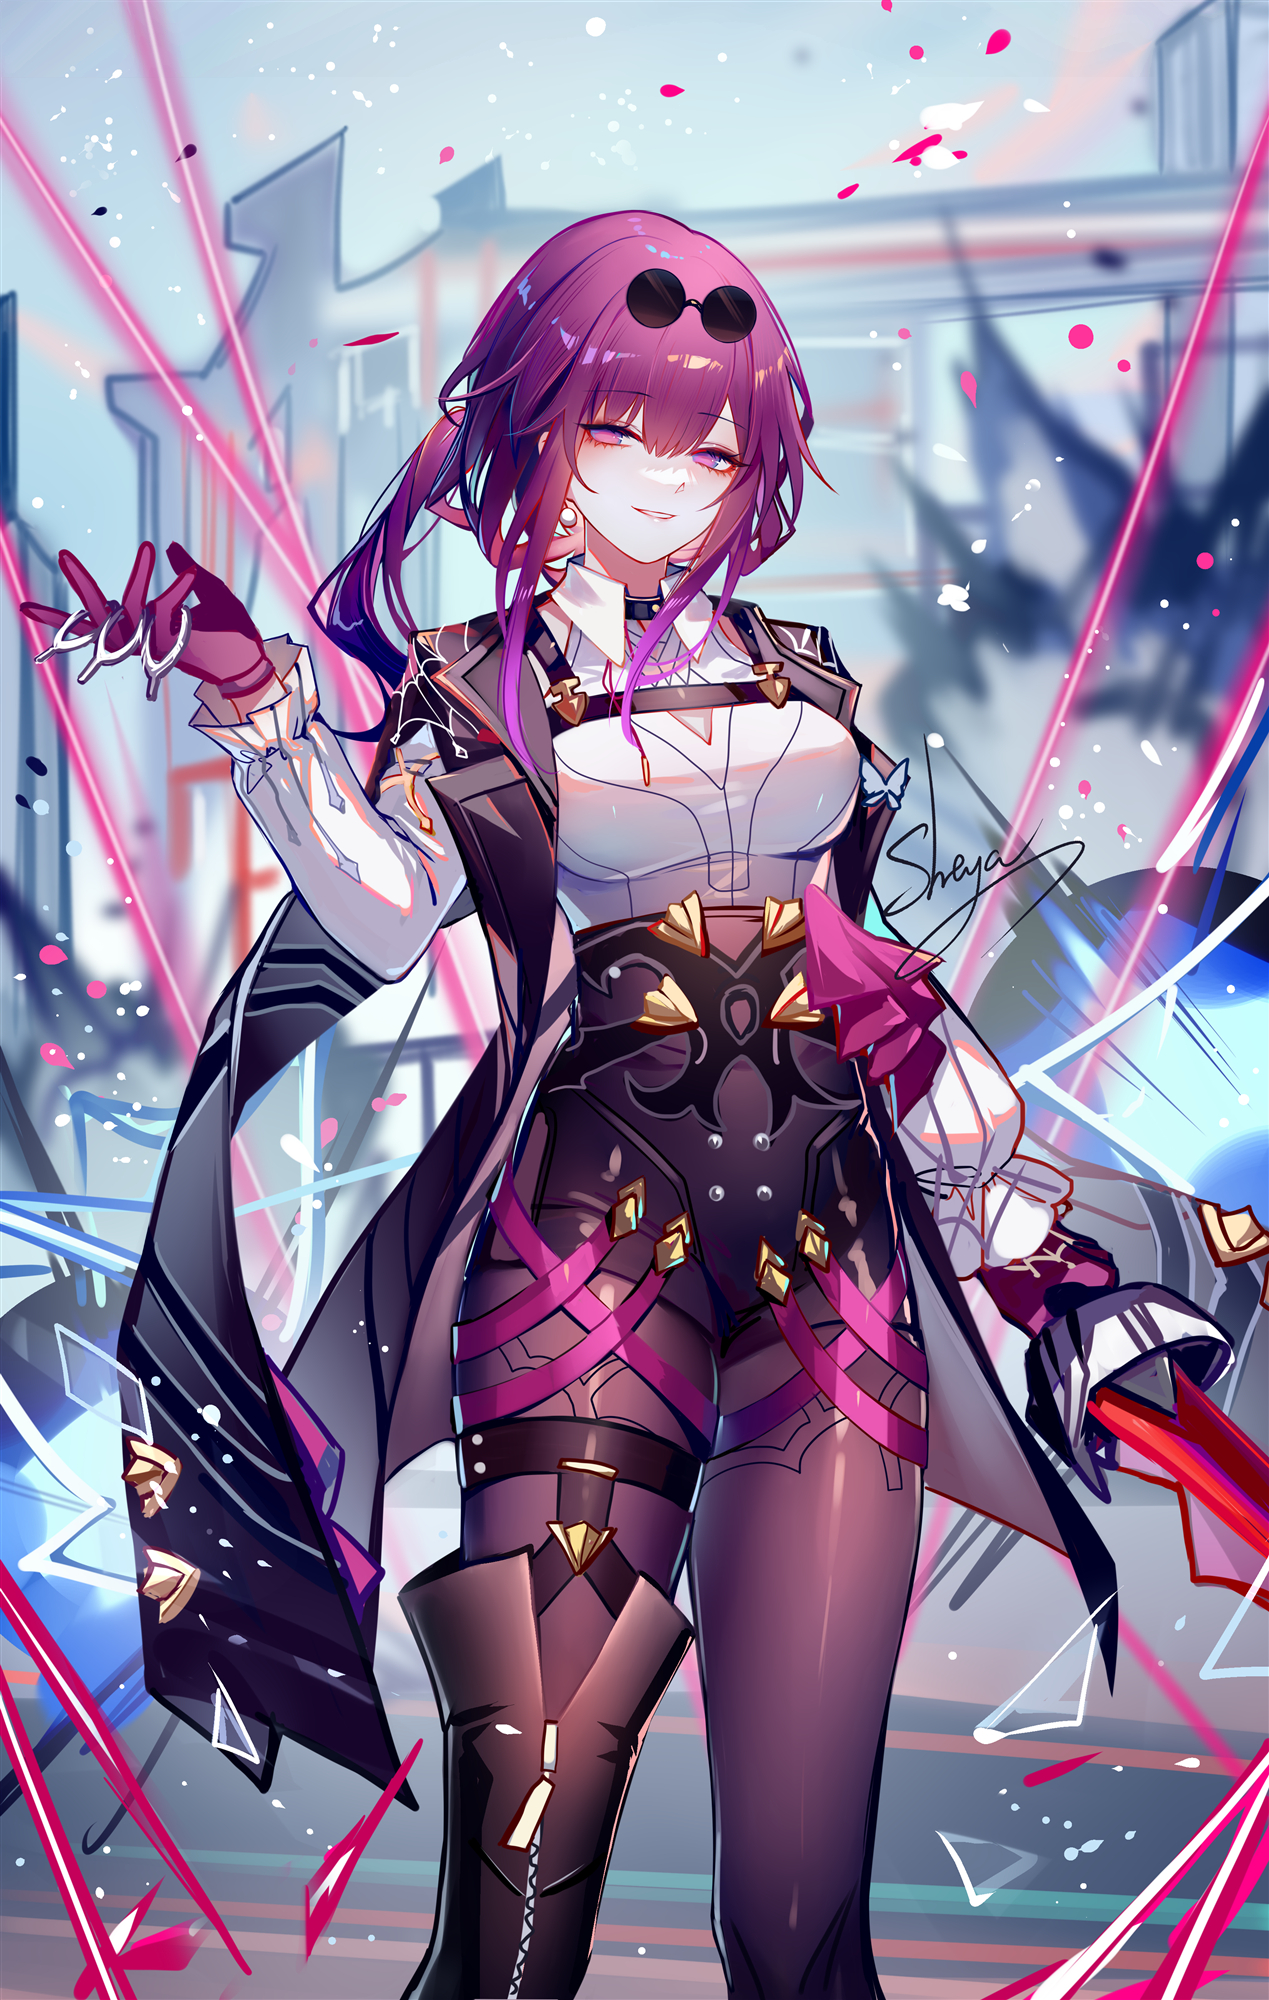 Honkai: Star Rail - Character Introduction - Jingliu Former Sword Champion  of the Luofu, now walking on the fine line between sanity and mara-struck,  diligently pursuing the old aspirations of yesteryear. Learn